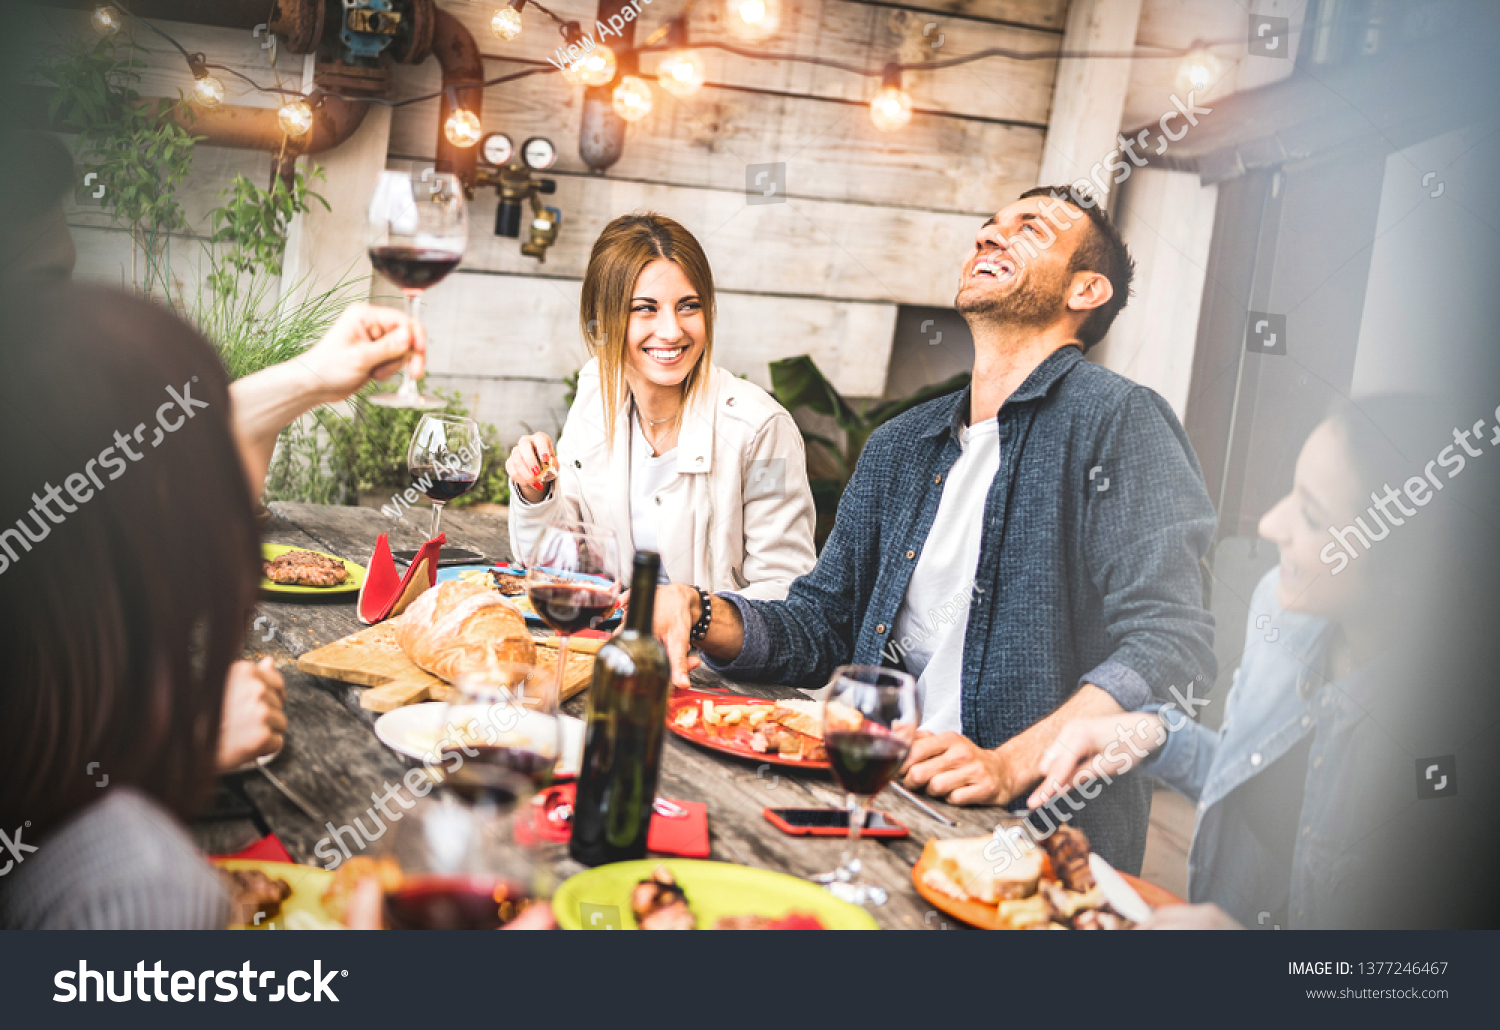 Young friends having fun drinking red wine on balcony at house dinner pic nic party - Hipster millennial people eating bbq food at fancy restaurant together - Dinning life style concept on warm filter #1377246467